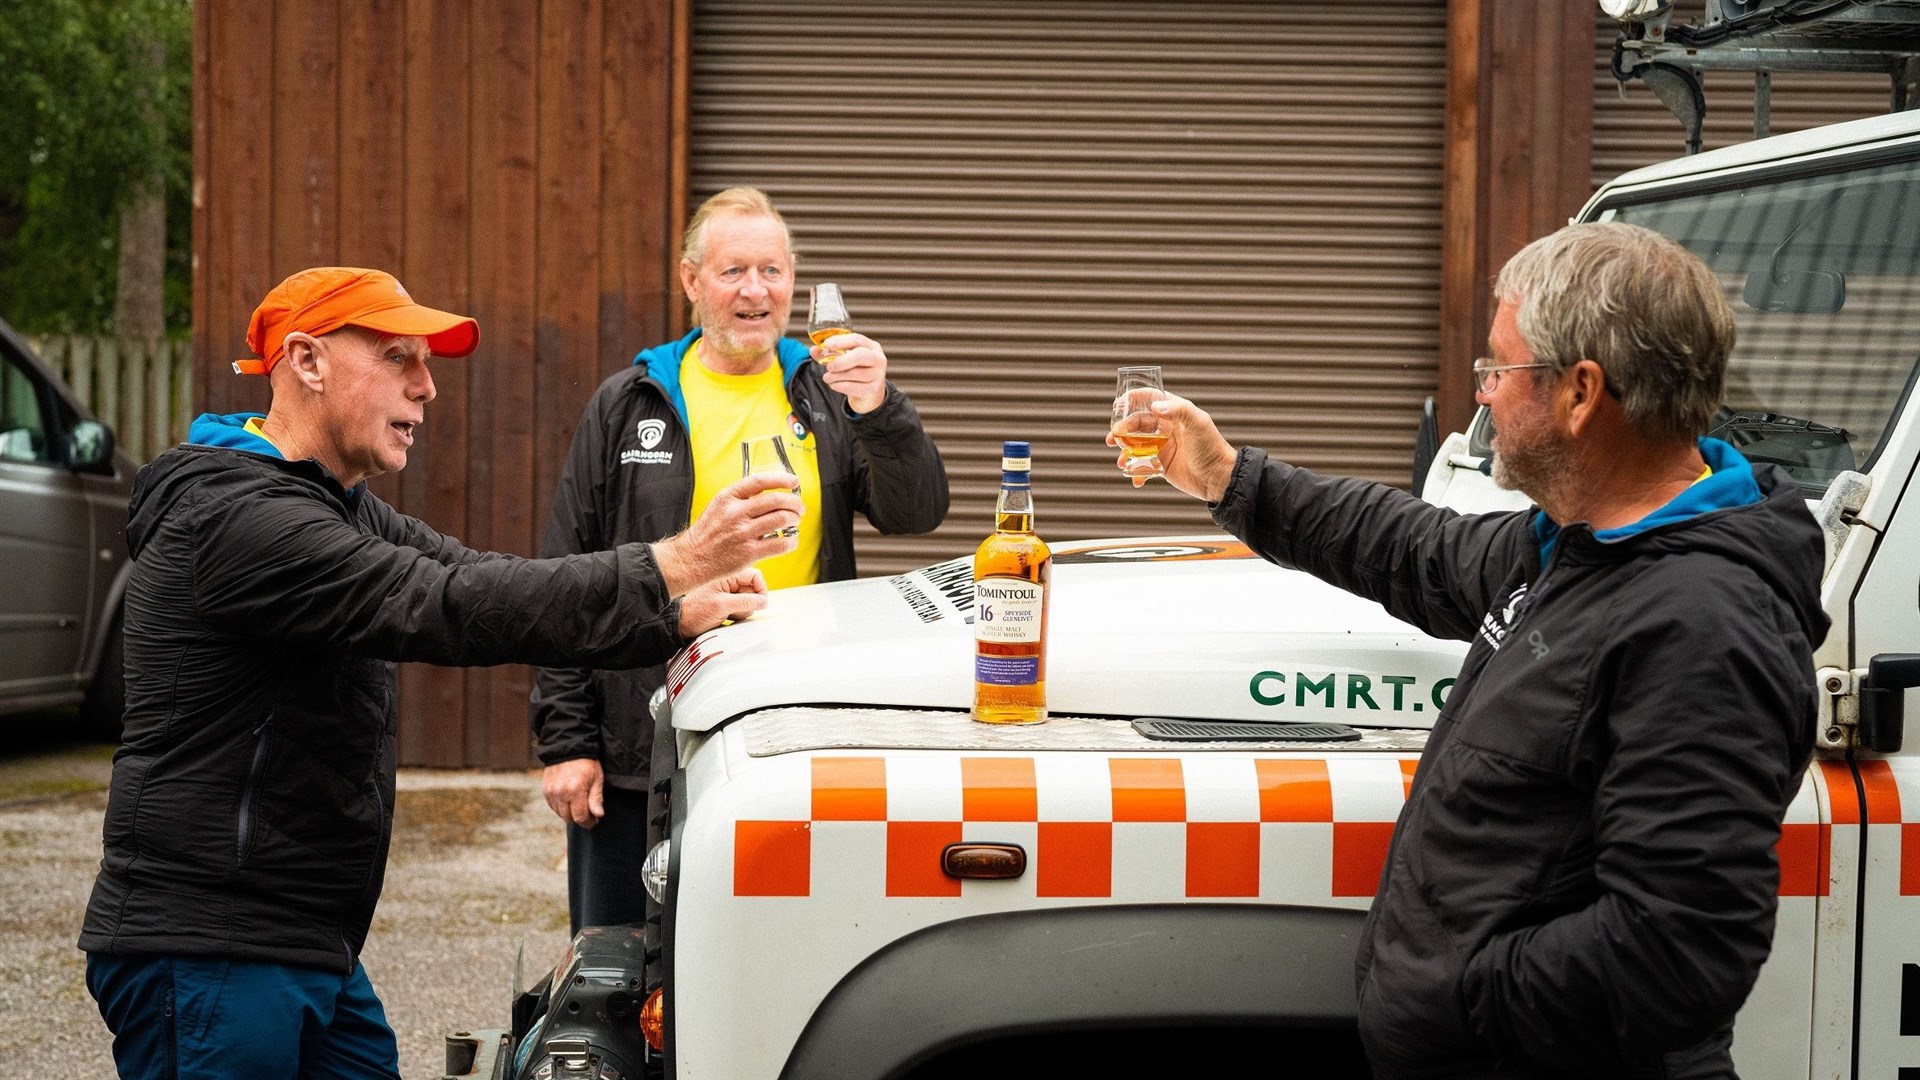 THAT'S THE SPIRIT: A hearty toast at the base this week to the craitur. From left, Willie Ross, Donnie Williamson and Willie Anderson.